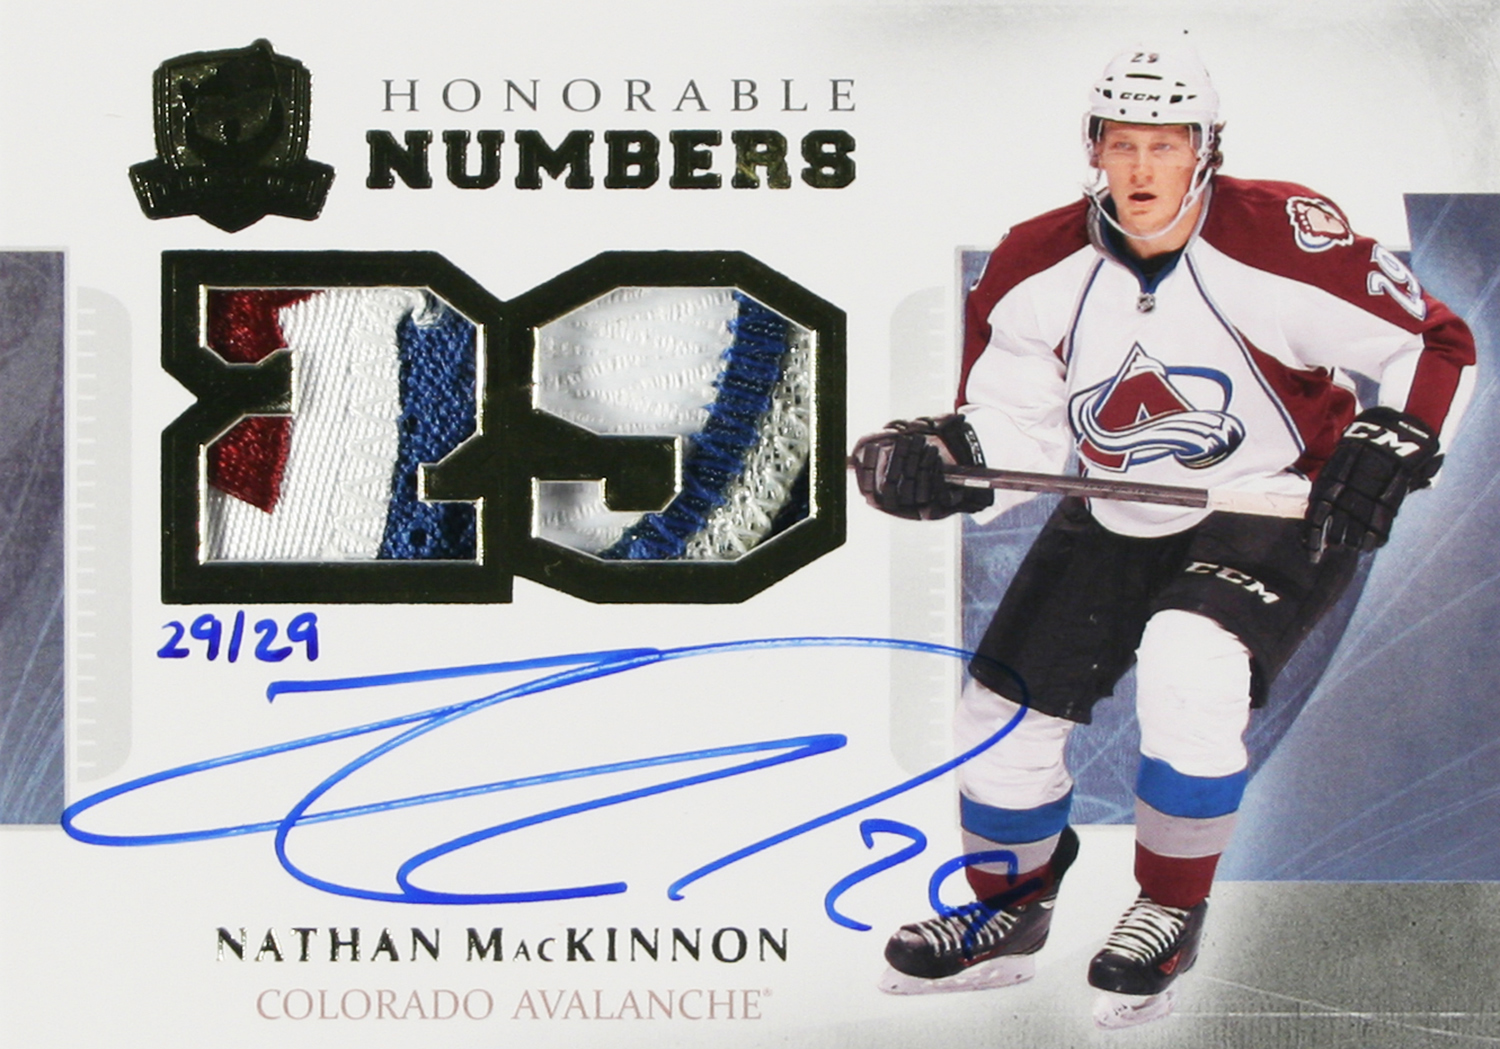 Nathan Mackinnon rookies in 2013/14 The Cup Hockey